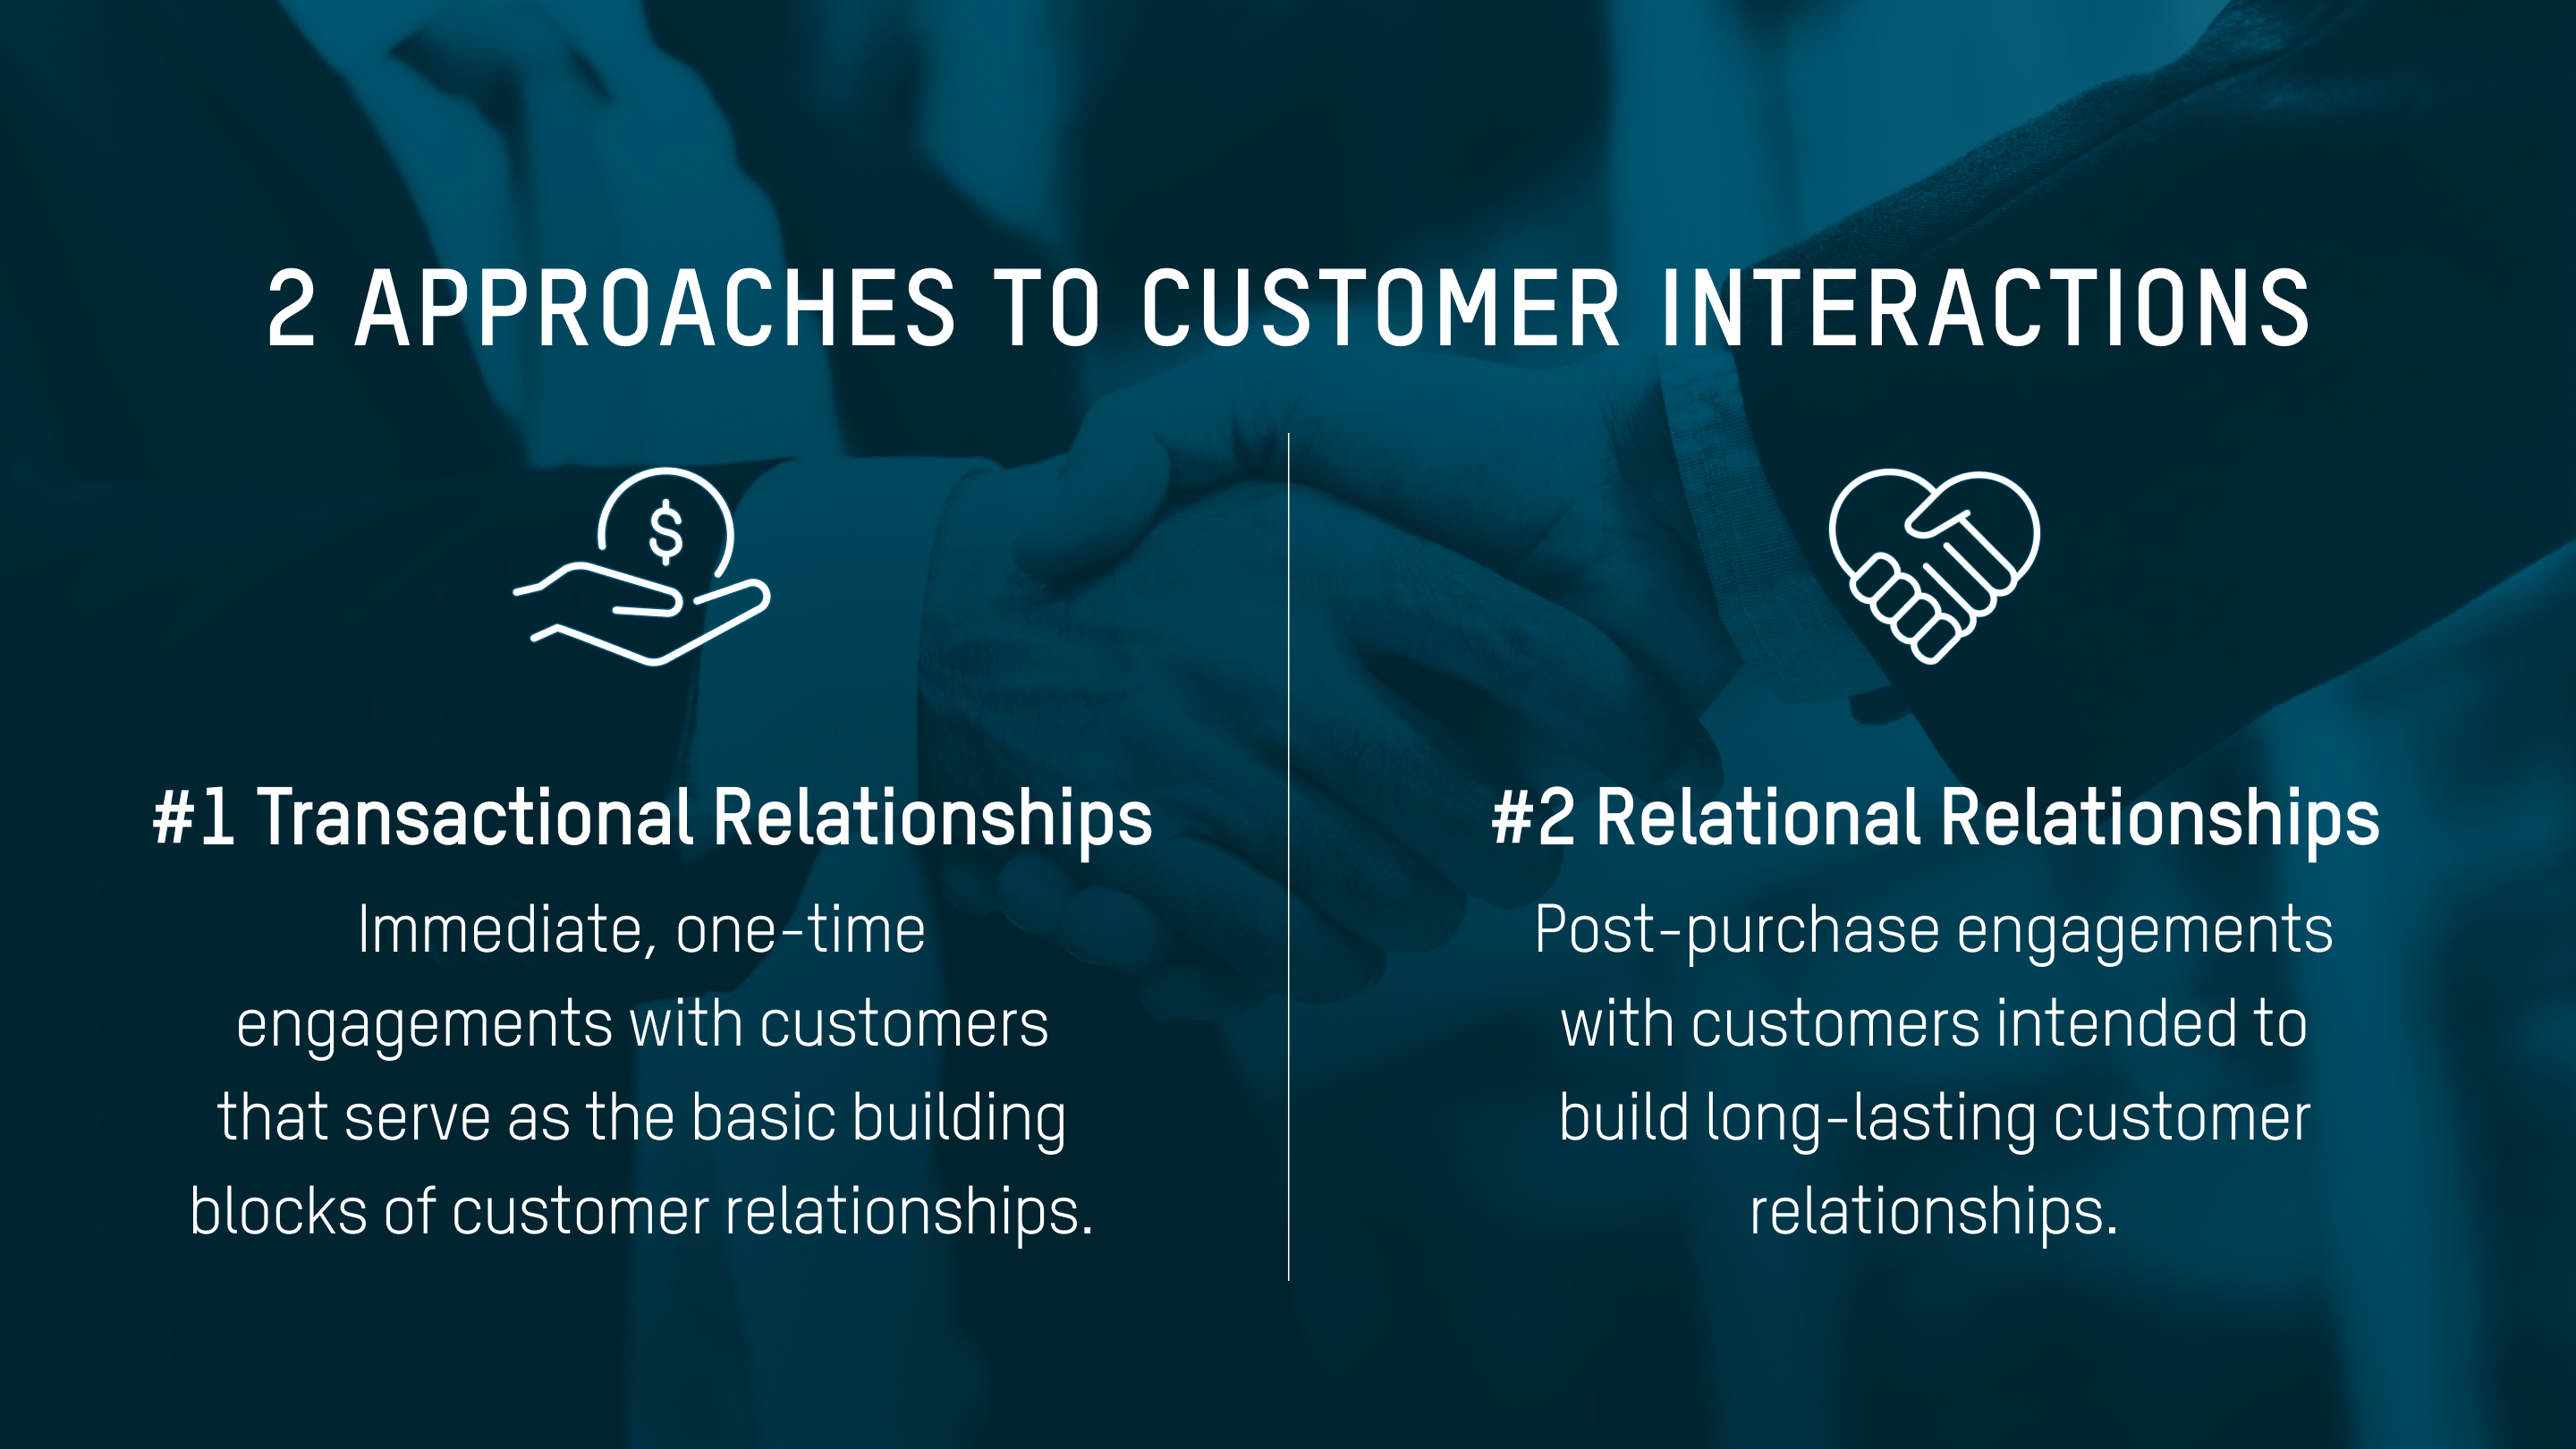 2 approaches to customer interactions: transactional relationships and relational relationships